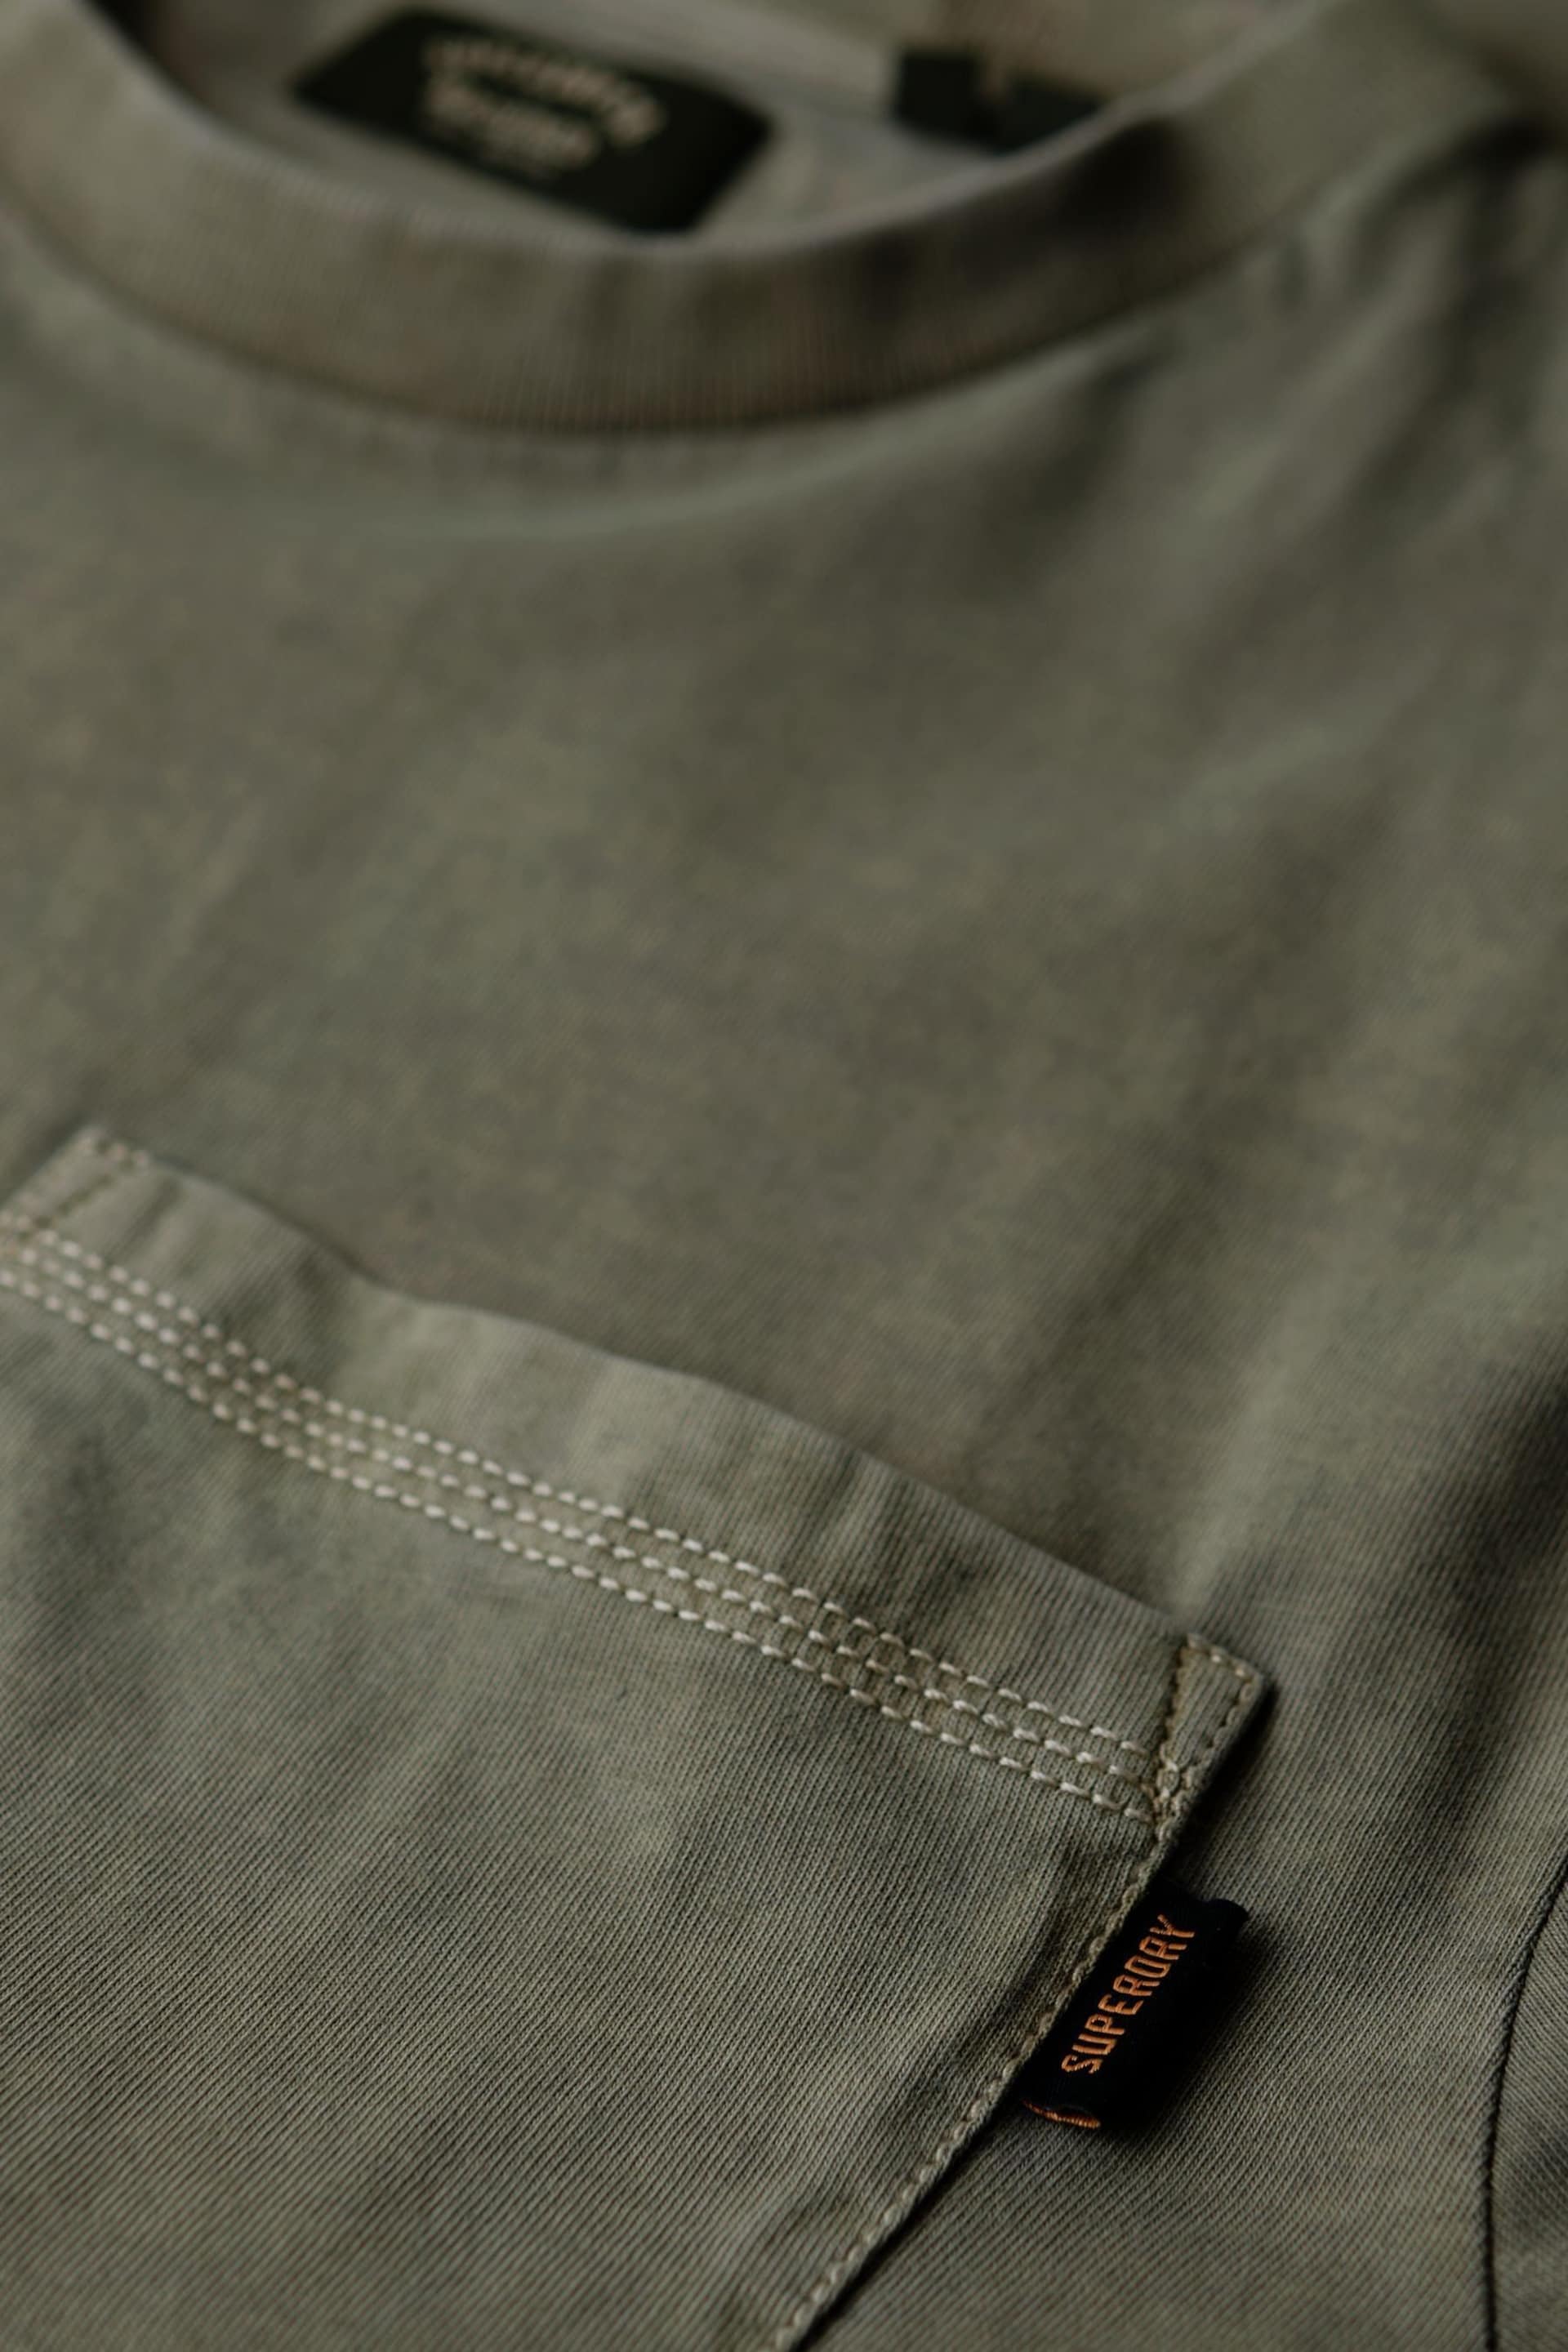 Superdry Green Contrast Stitch Pocket T-Shirt - Image 5 of 6